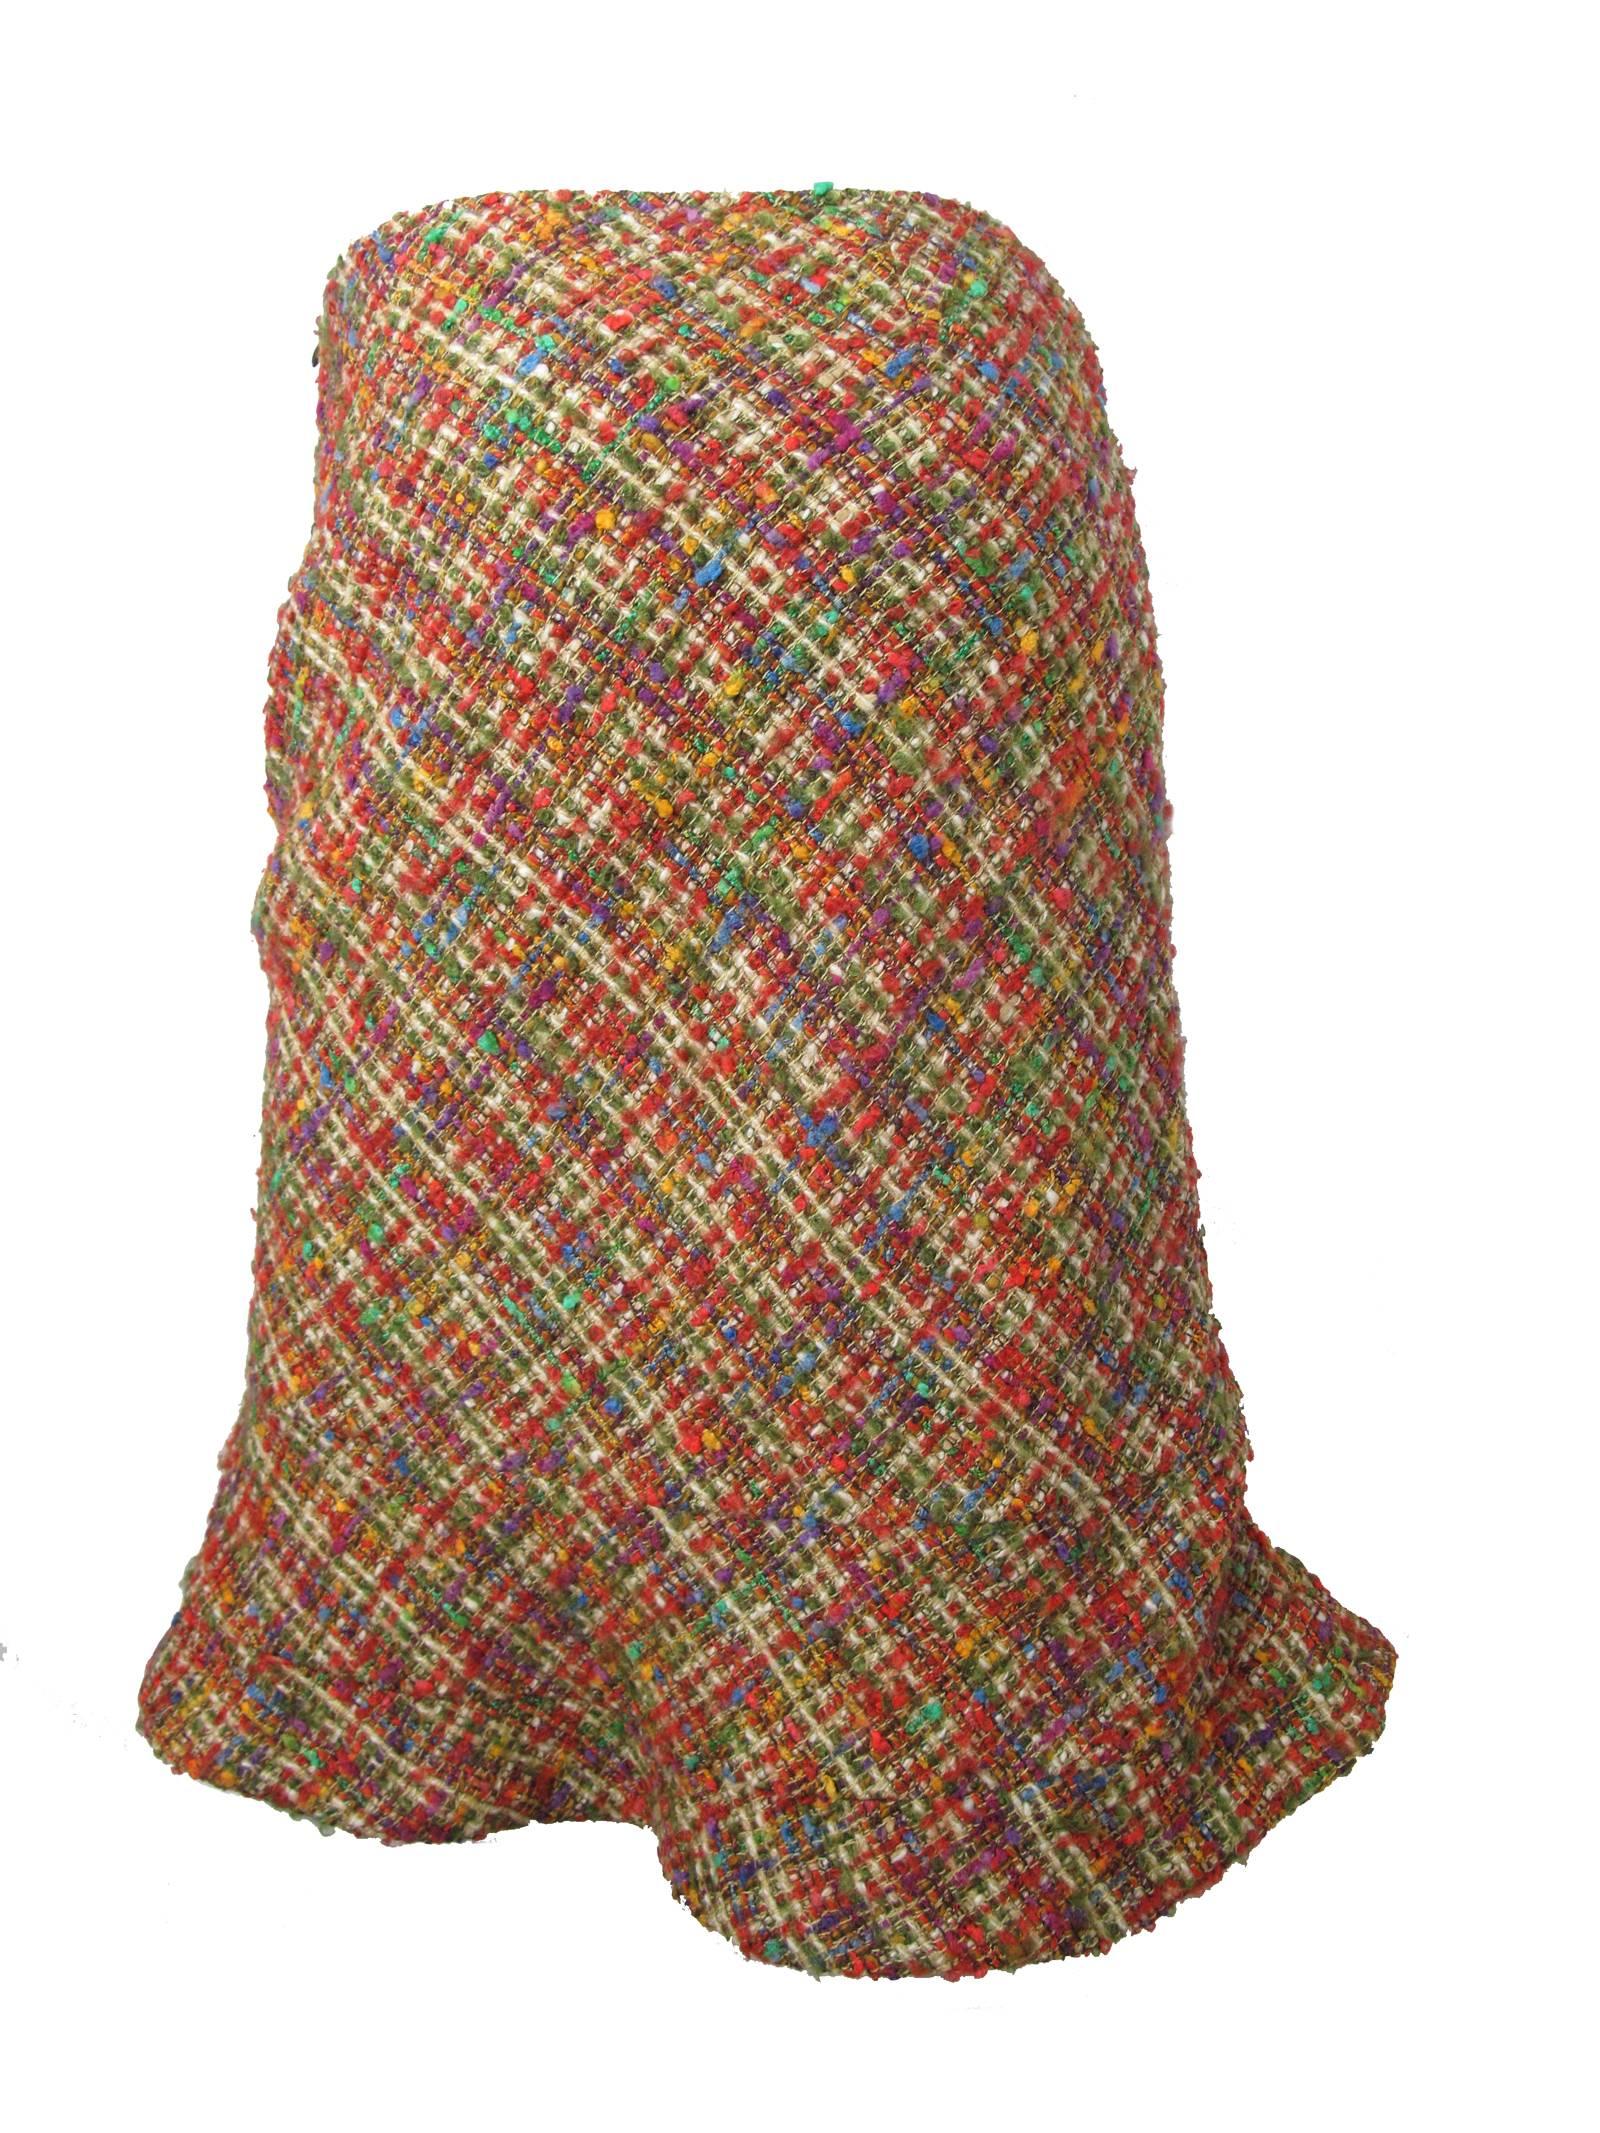 Junya Watanabe for Commes des Garcons multi colored wool skirt. C. 2000. wool, acrylic & nylon fabric. Lined. made in Japan. Size Med
30" waist, 35" hips, 25" length. 
We accept returns for refund, please see our terms.  We